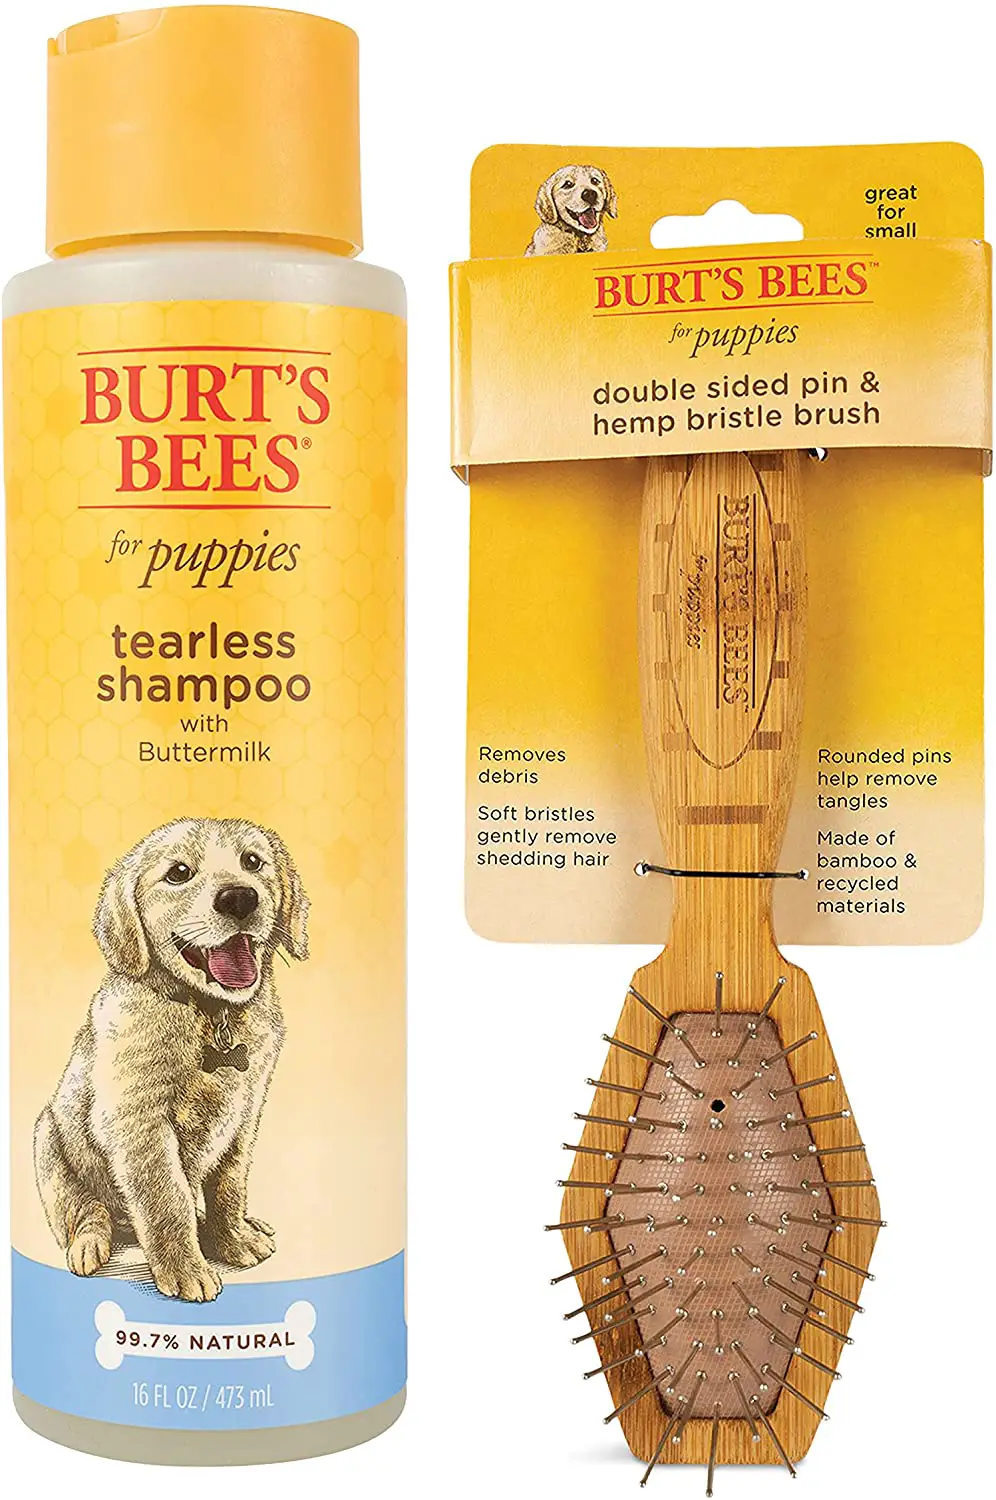 Burt's Bees for Dogs 2 in 1 Dog Shampoo & Conditioner